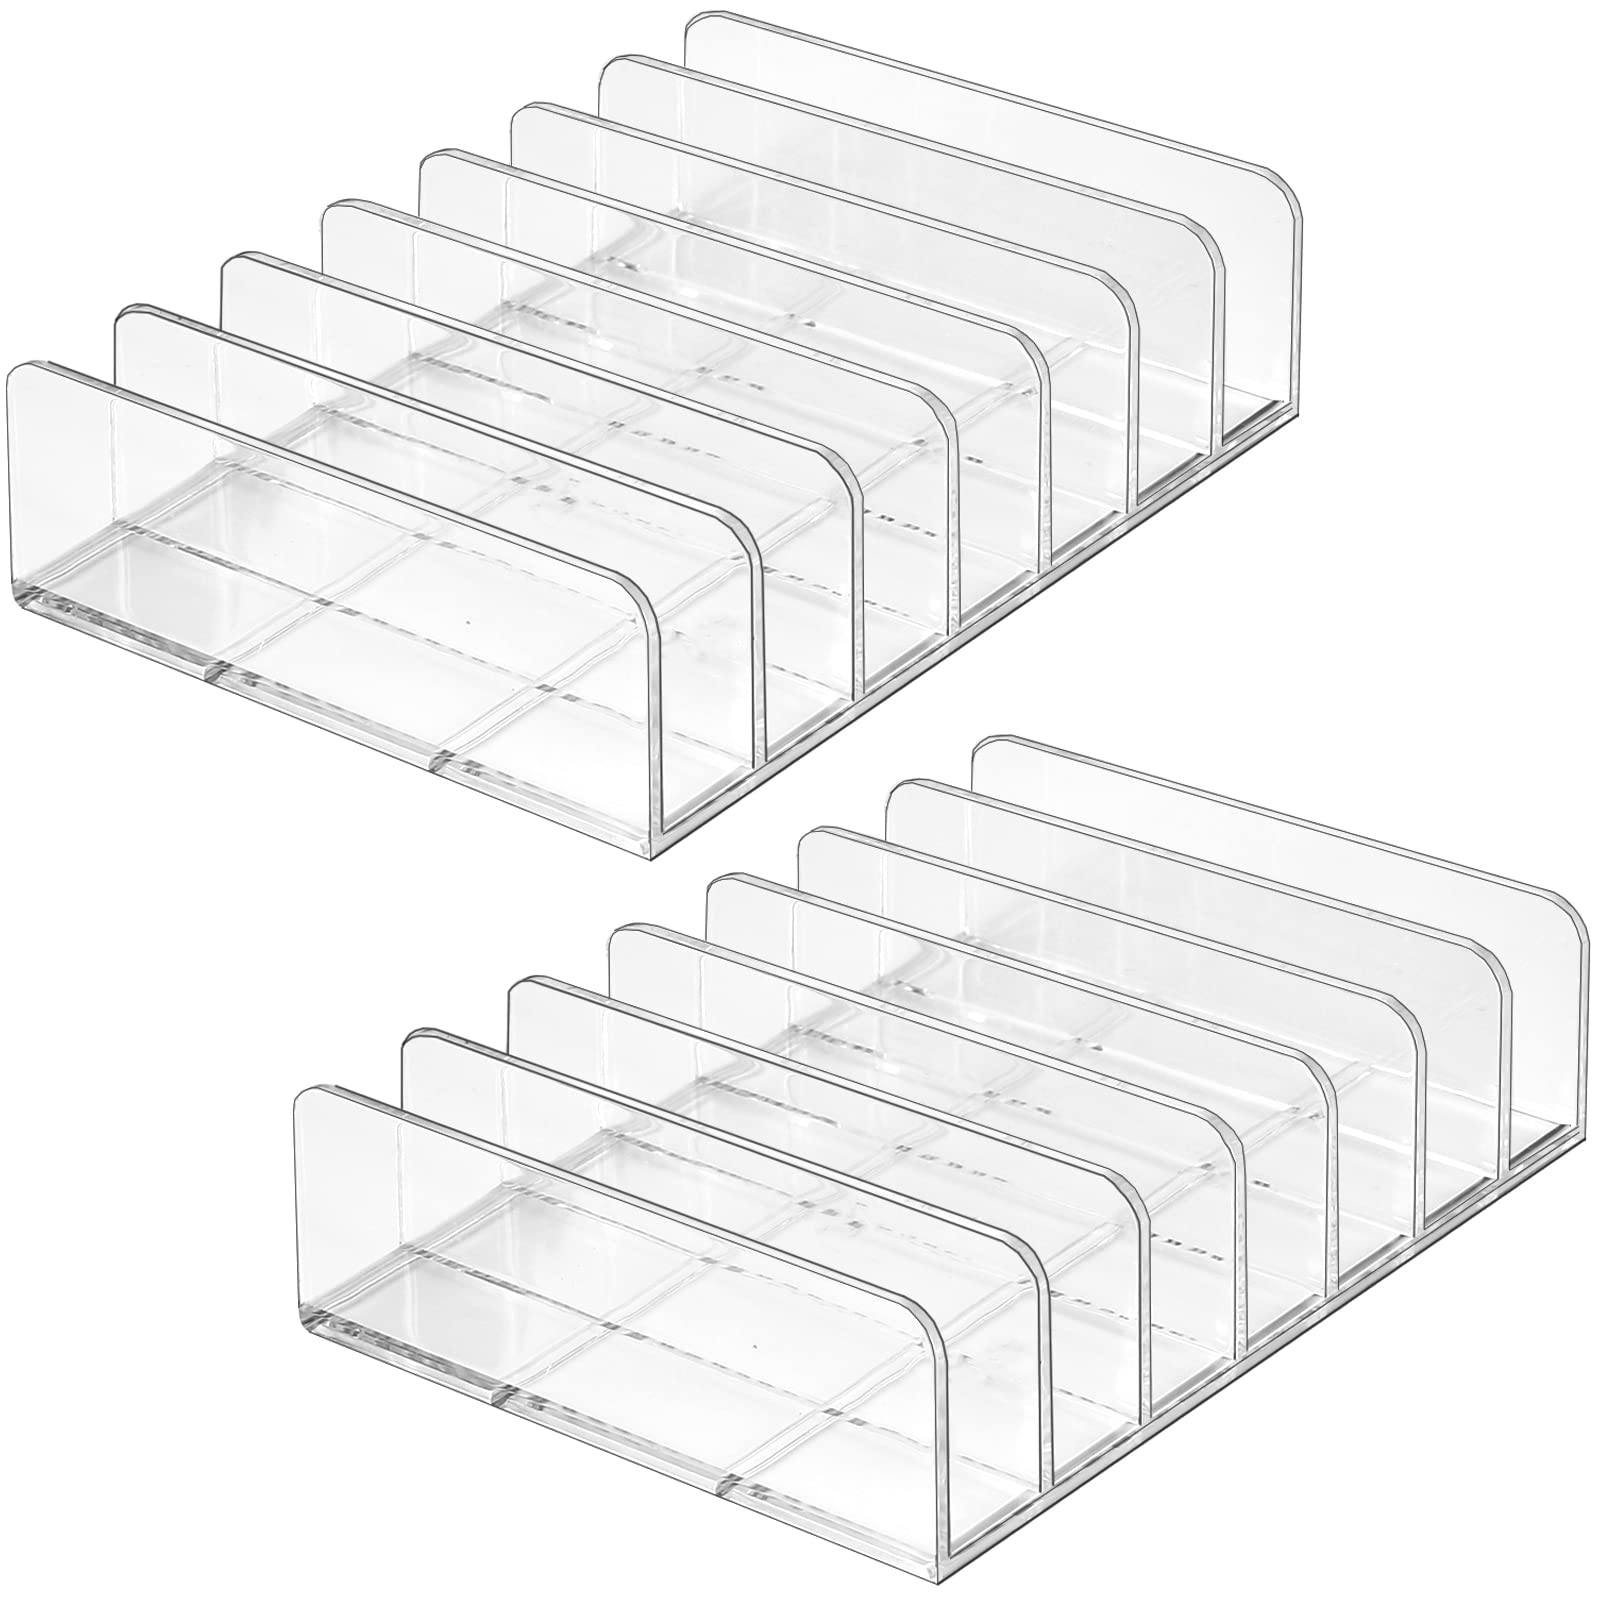 [2 Pack] Lolalet Clear Acrylic Makeup Palettes Organizer, Divided Sections Stand Rack For Eyeshadows Contours Bronzers Blush Face Powder, Cosmetics Display Storage Holder – 14 Slots